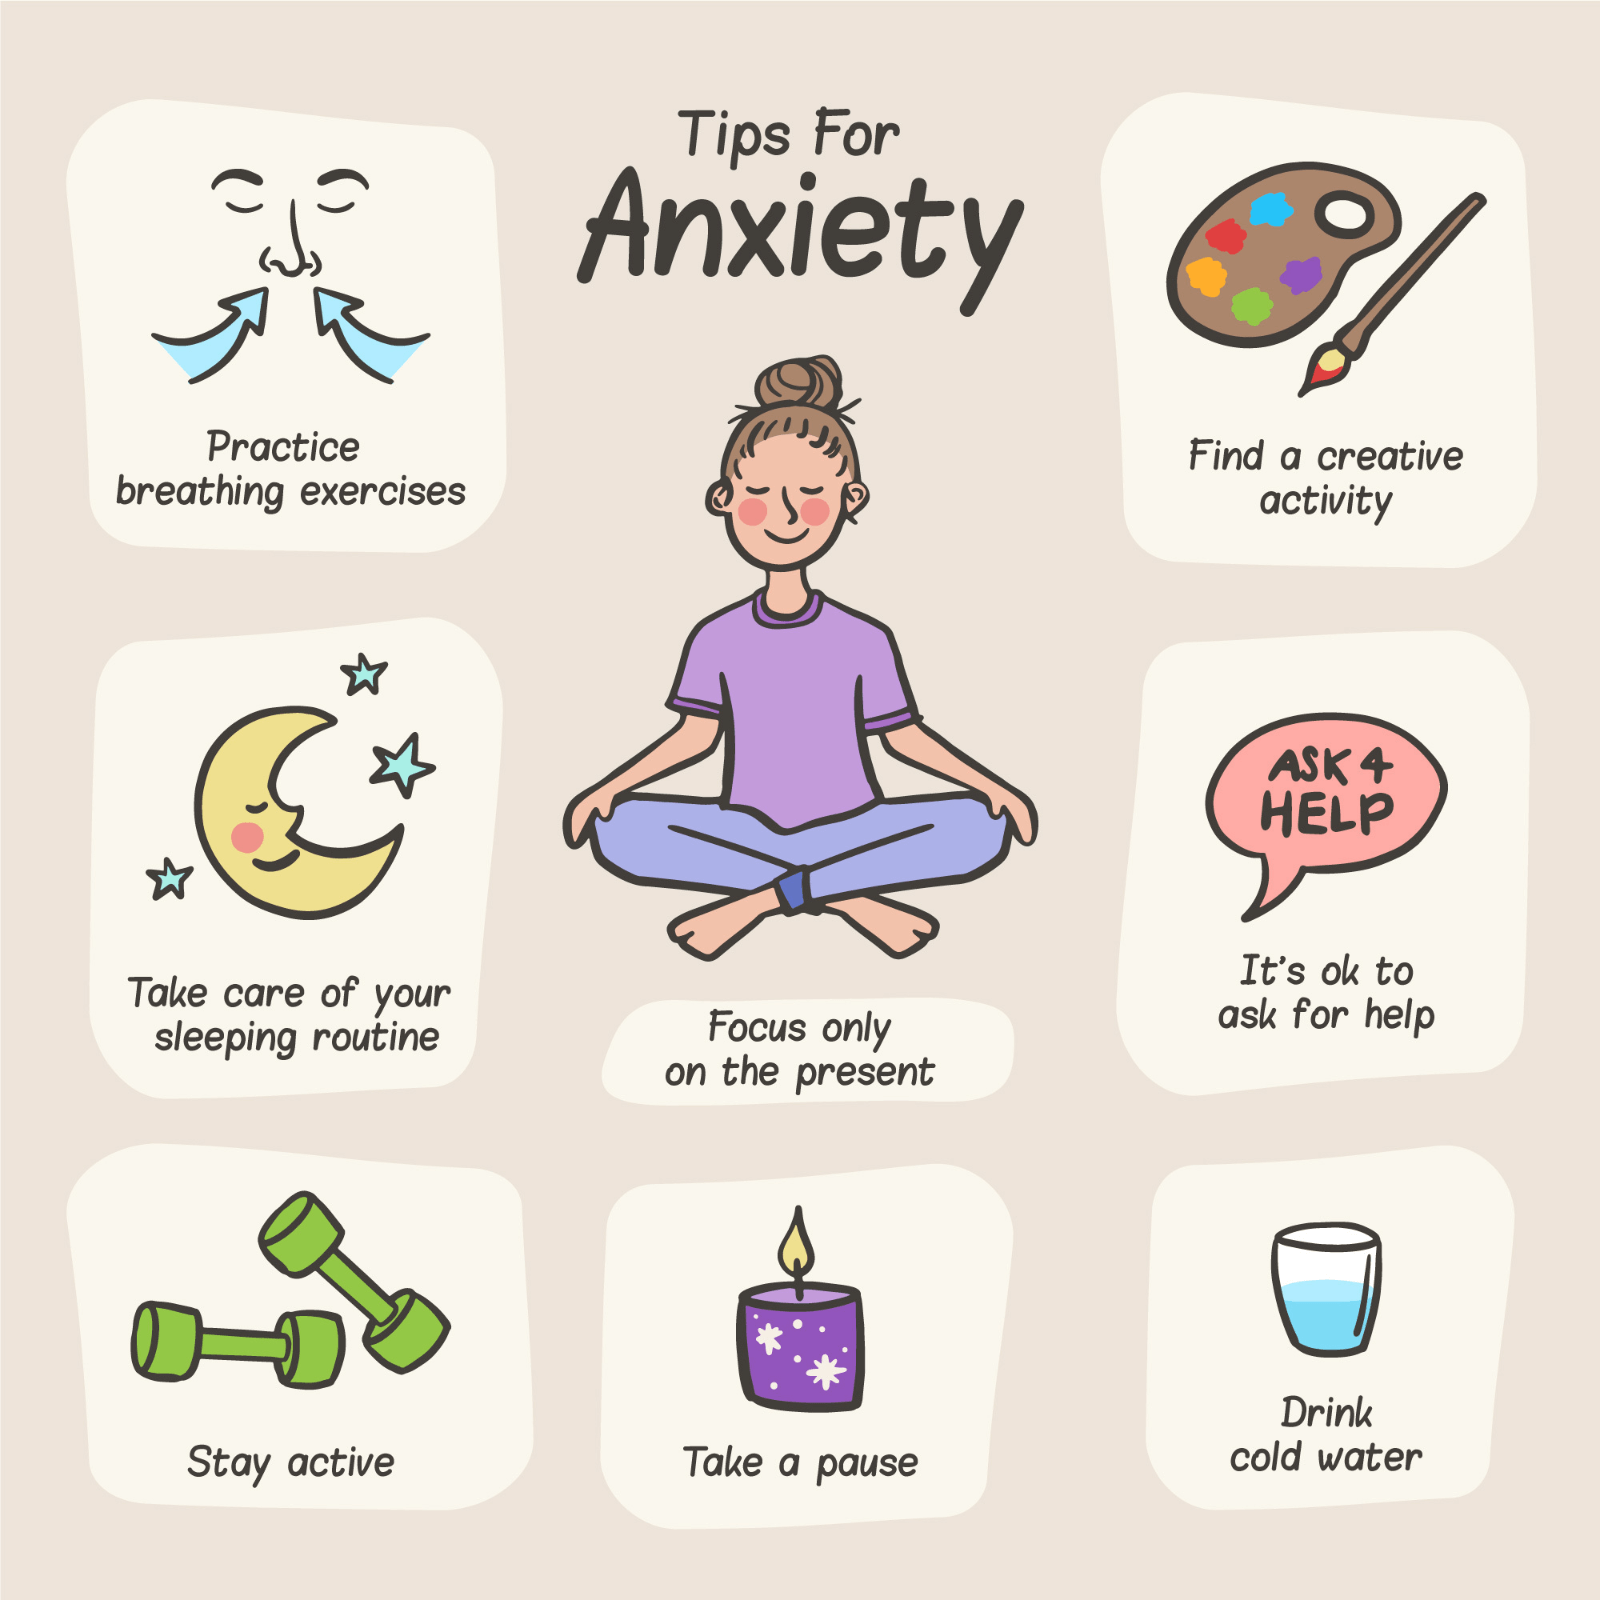 Stress and Anxiety 